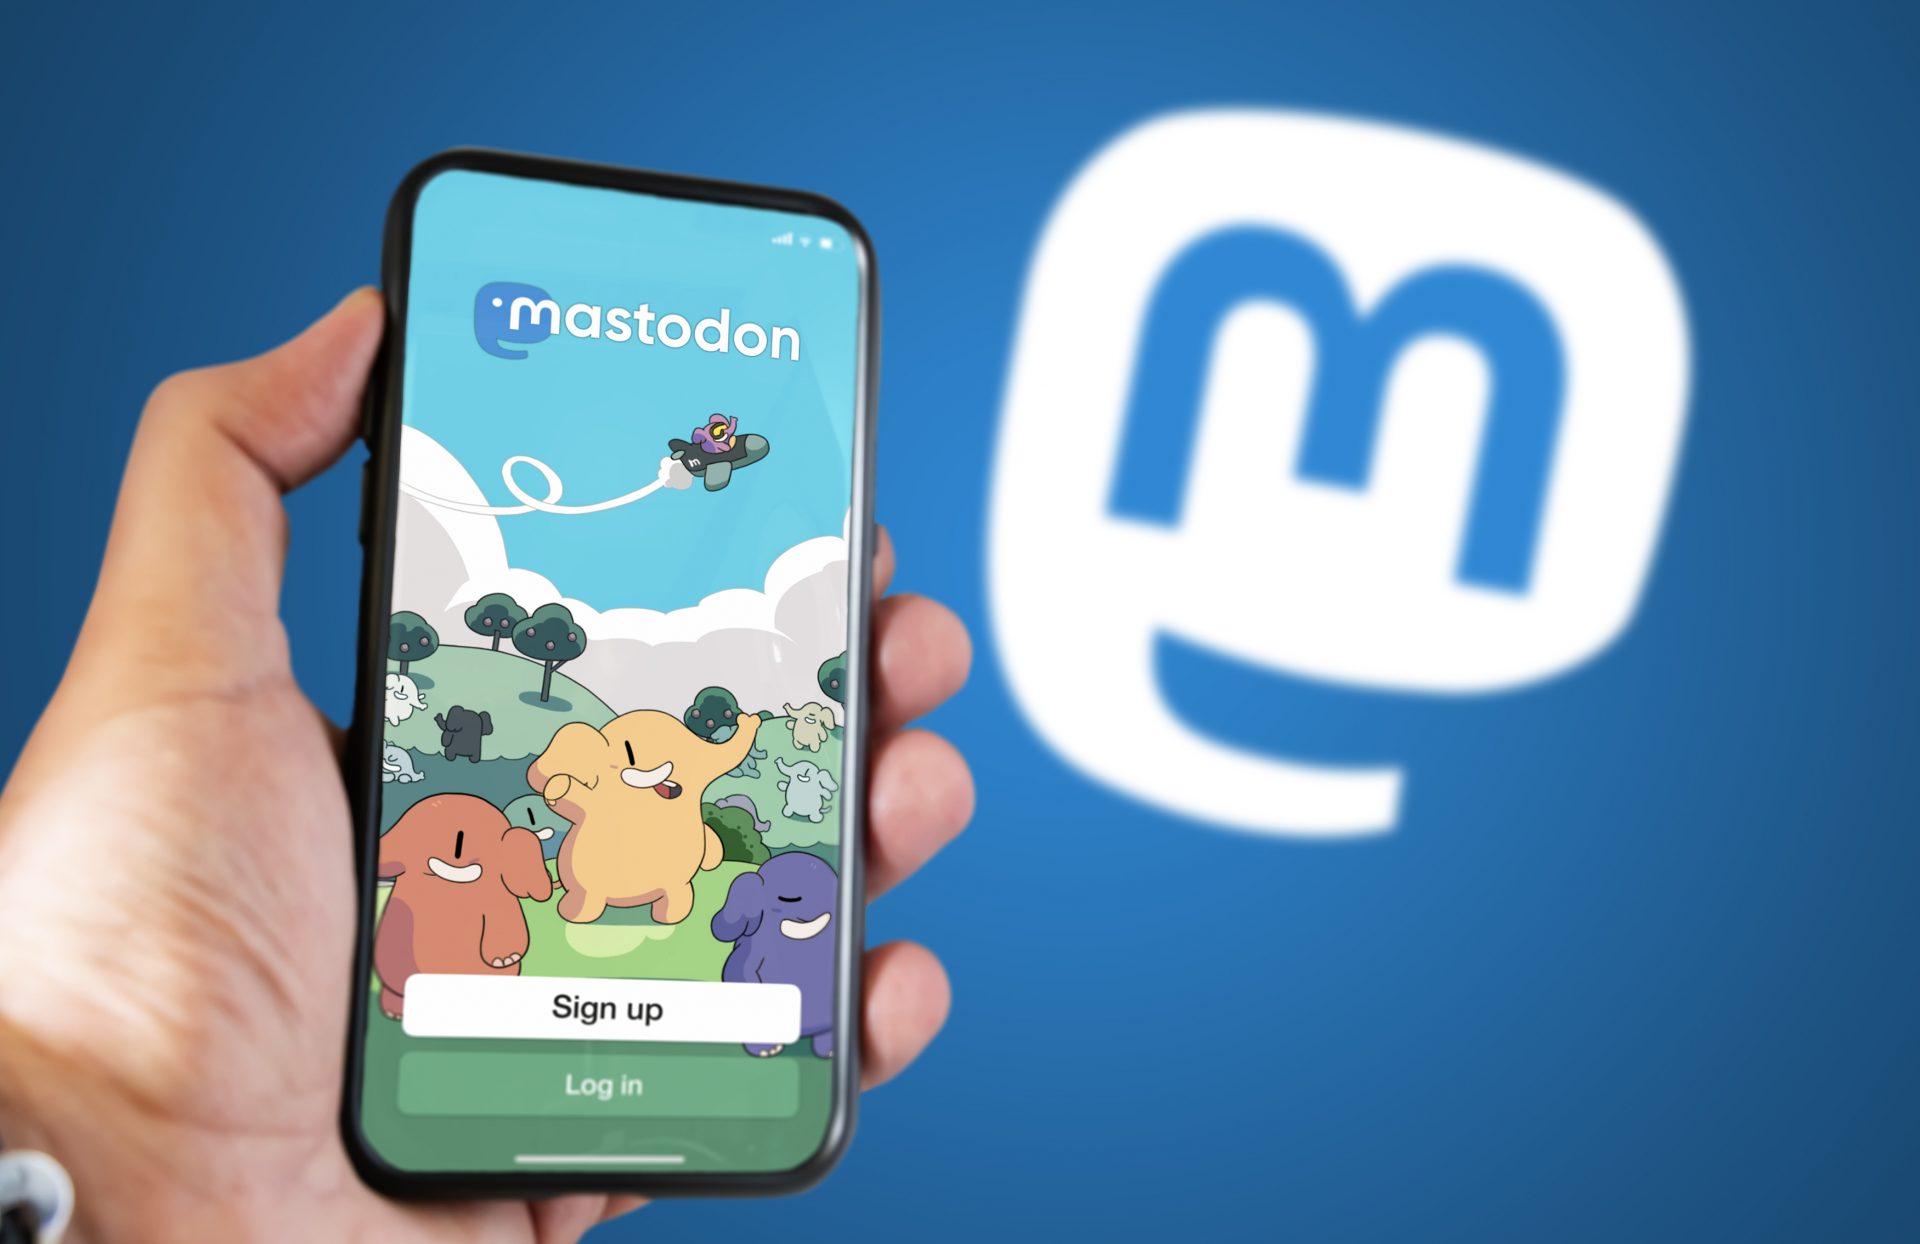 How to Get Started on Mastodon